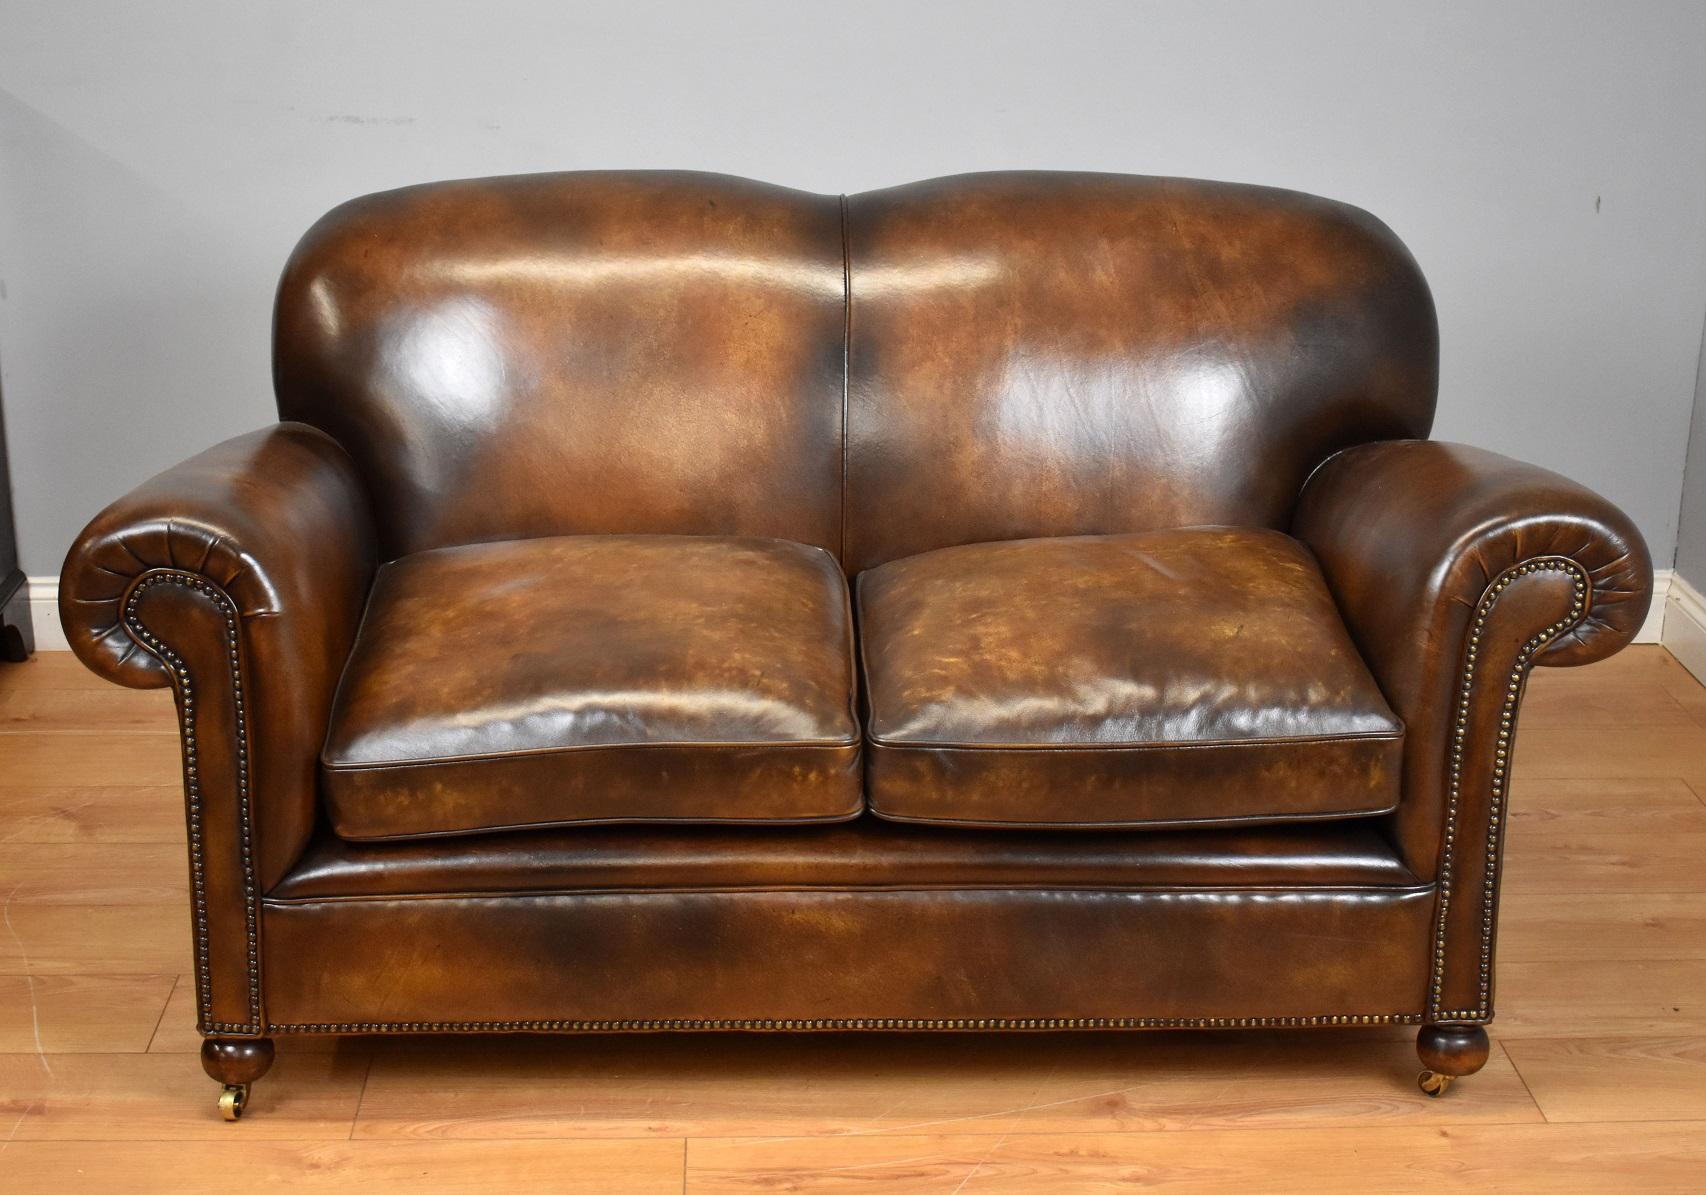 For sale is a good quality antique hand dyed brown leather sofa, in excellent condition. 

Measures: Width 65